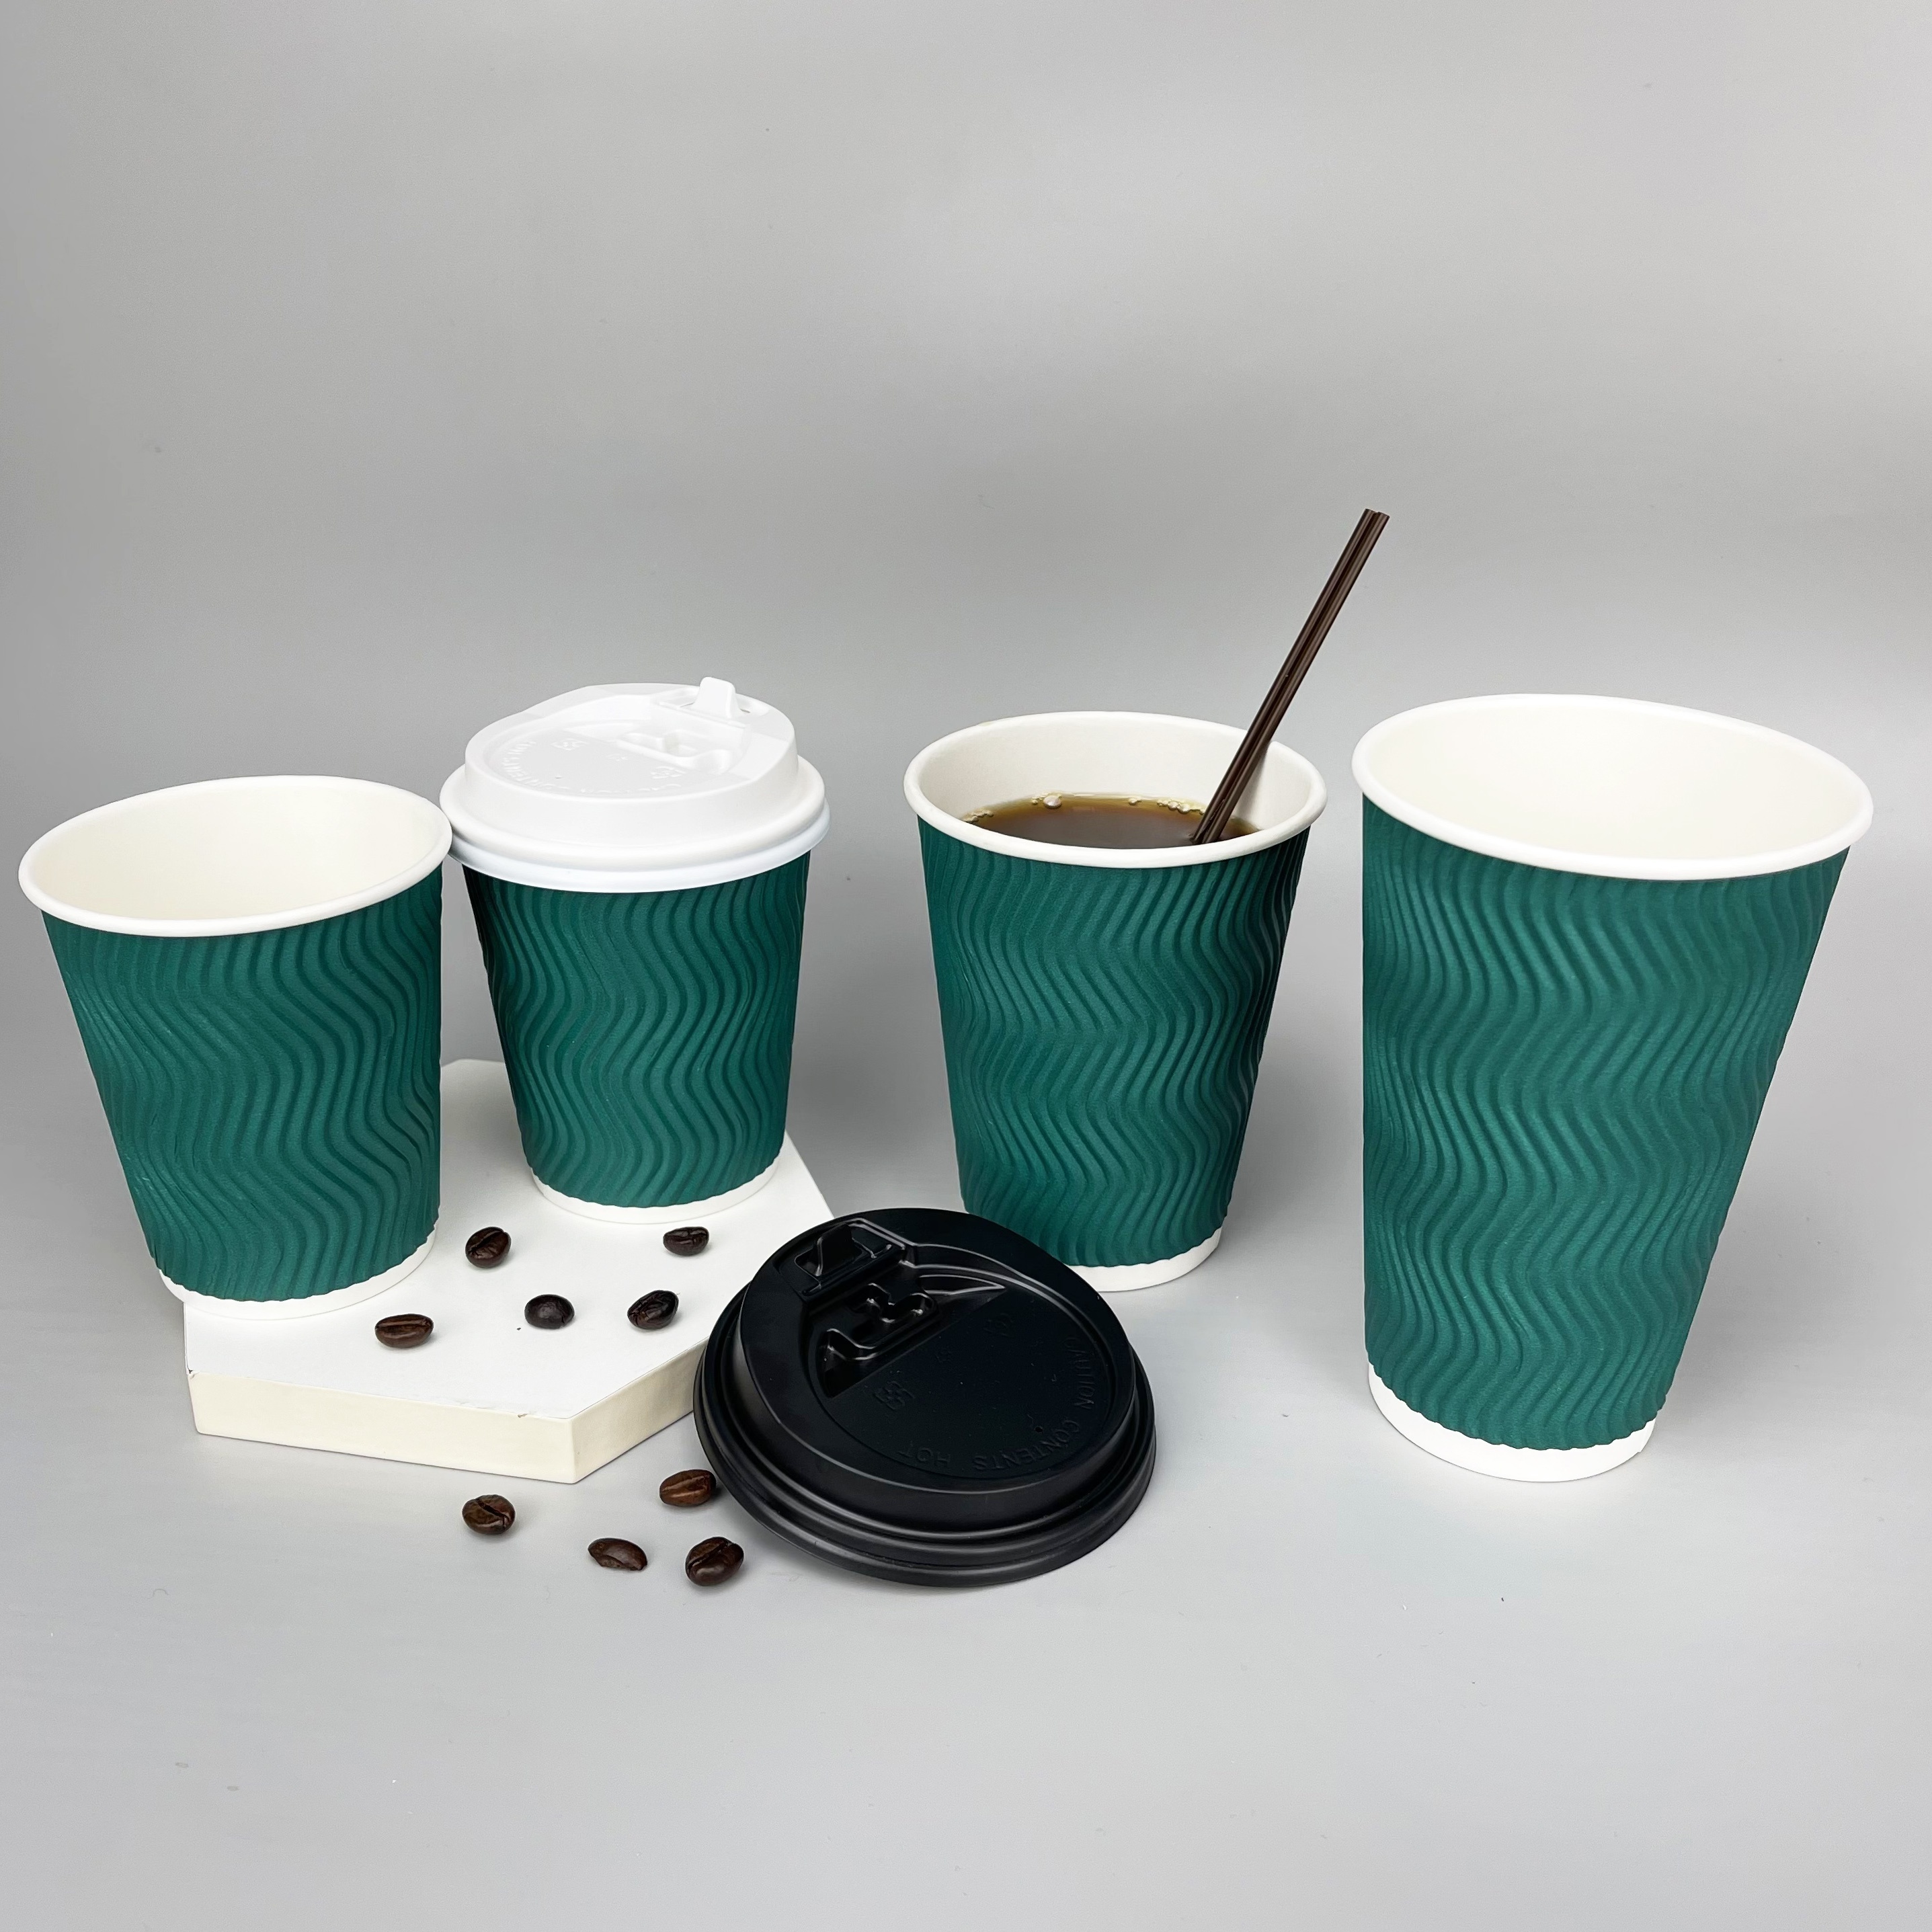 50pcs/lot Disposable Coffee Cup with Cover Milk Tea Paper Cup